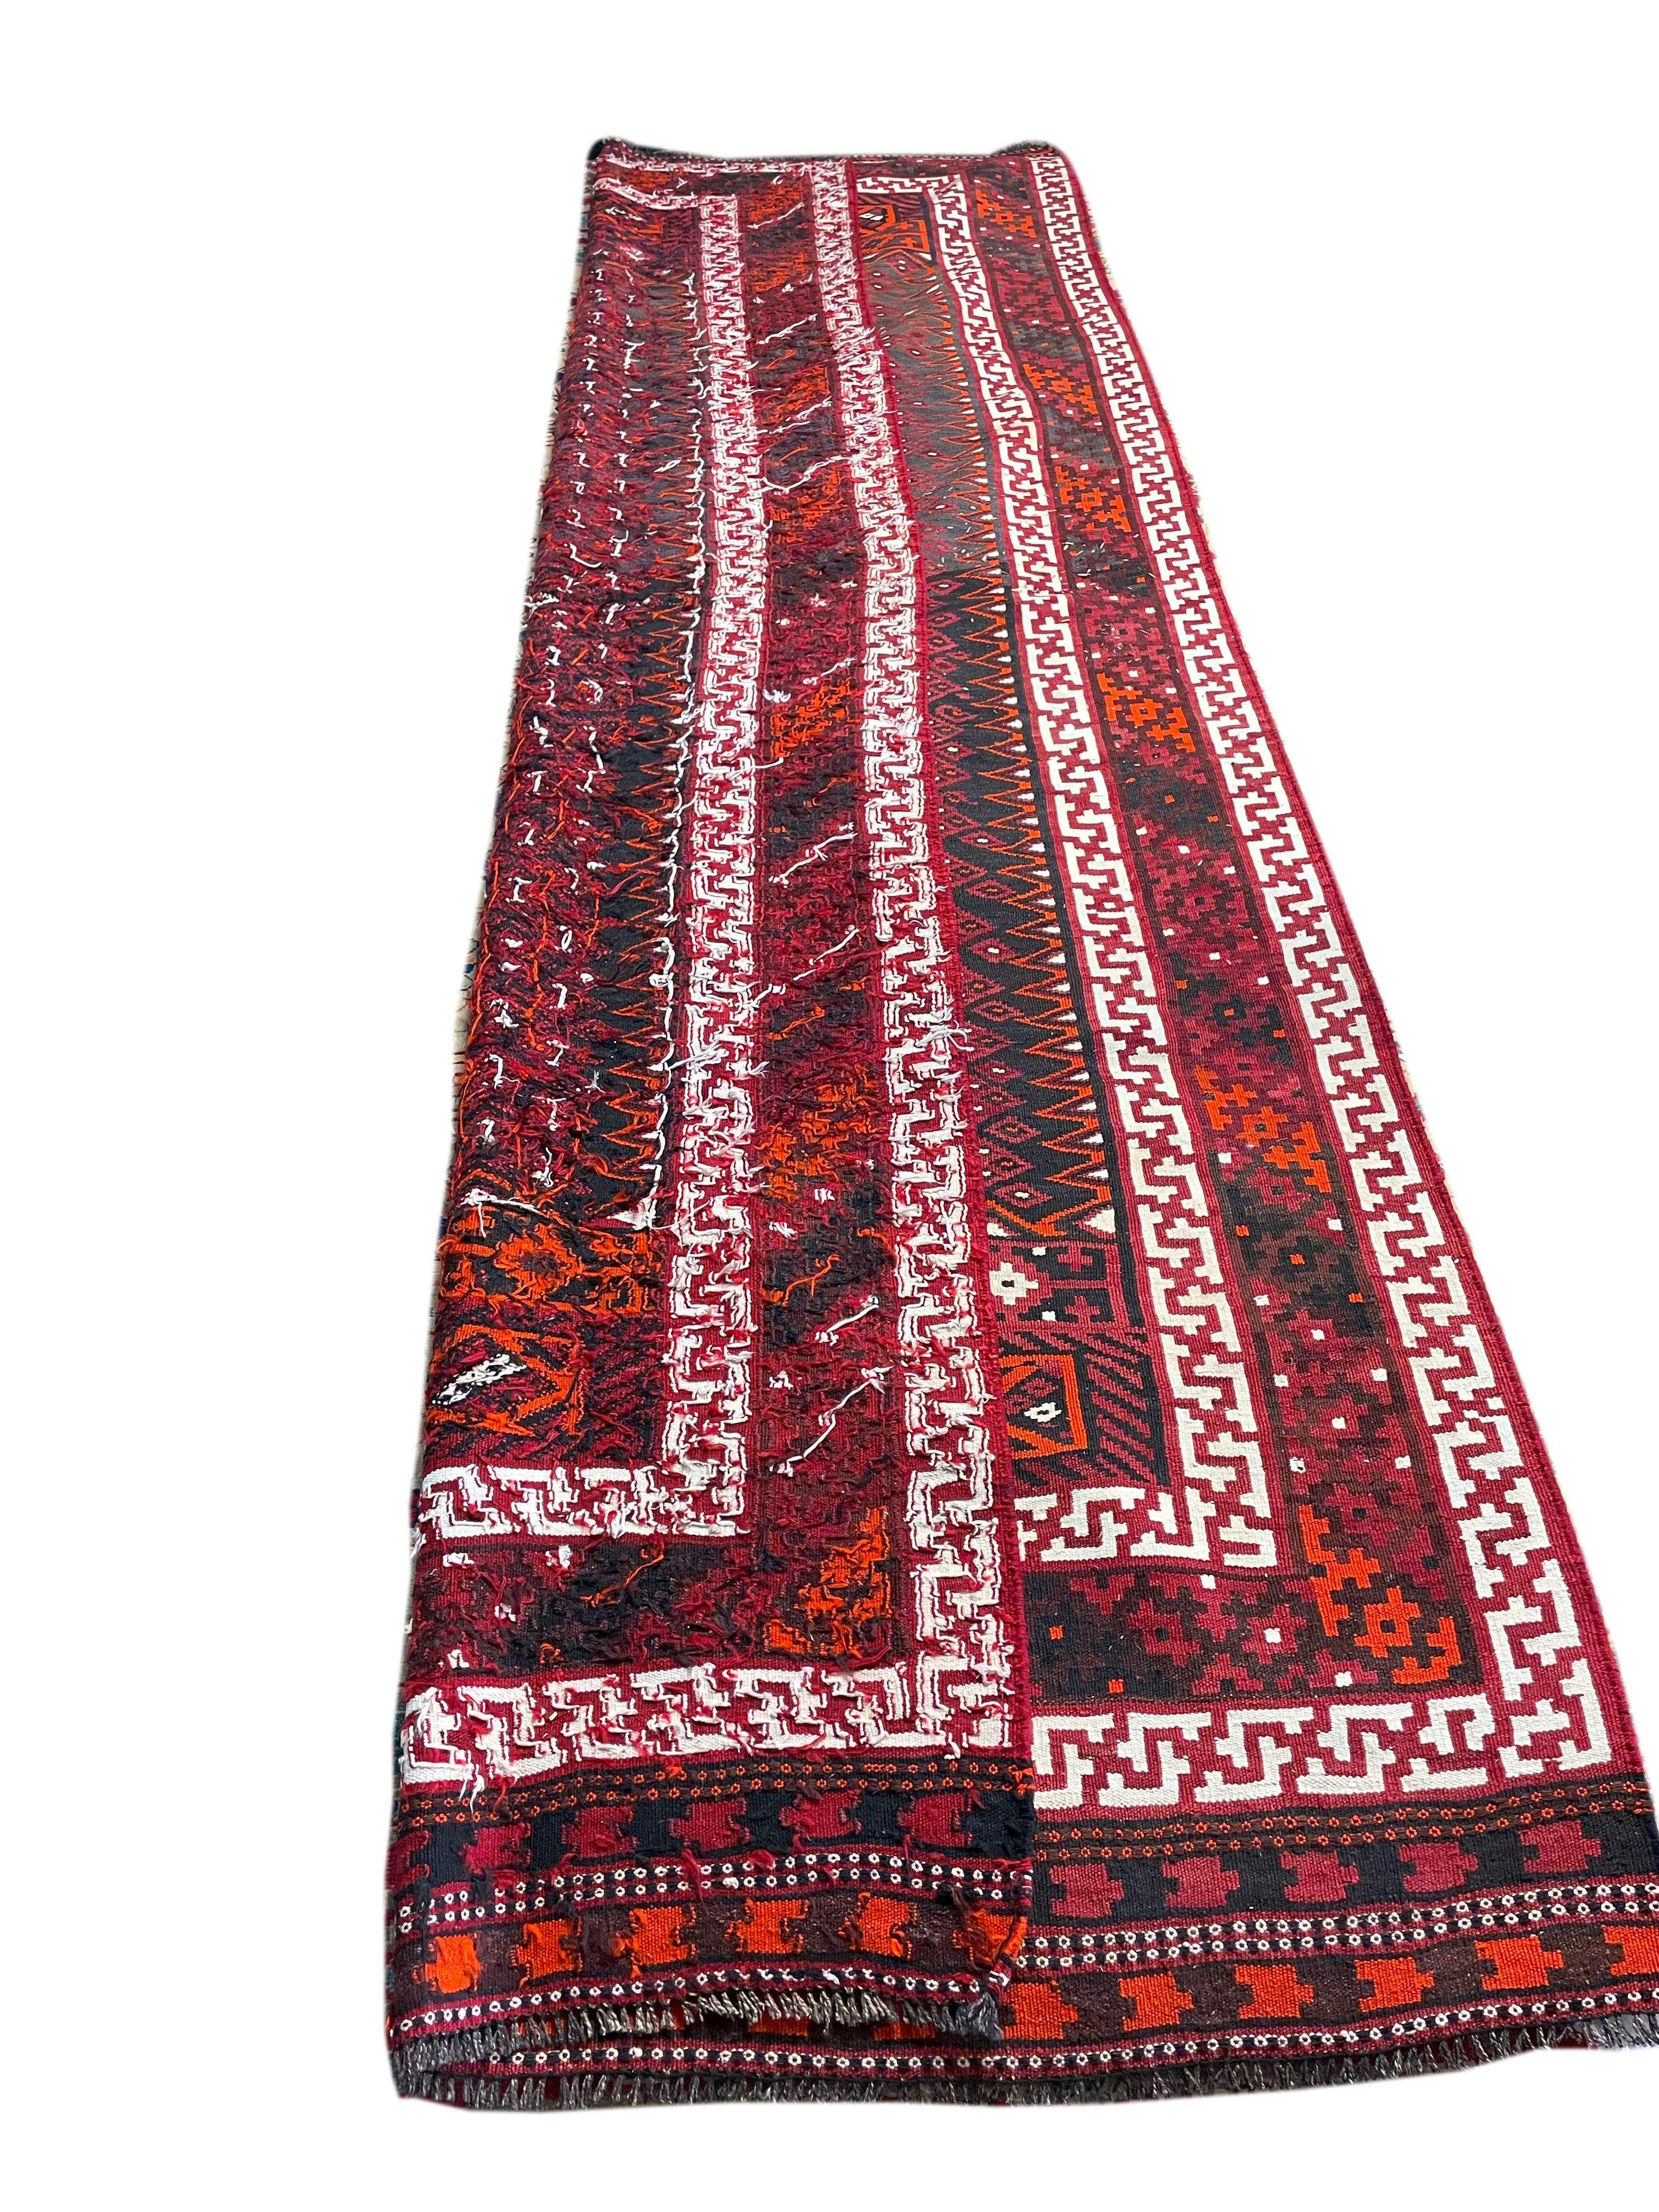 Gorgeous 60's Persian Bolouchi Kilim. This piece's tight weave and intricate needle work not only make this rug attractive, but also incredibly durable. The signature wine color of the Balouchi people makes for a pleasant color scheme that looks